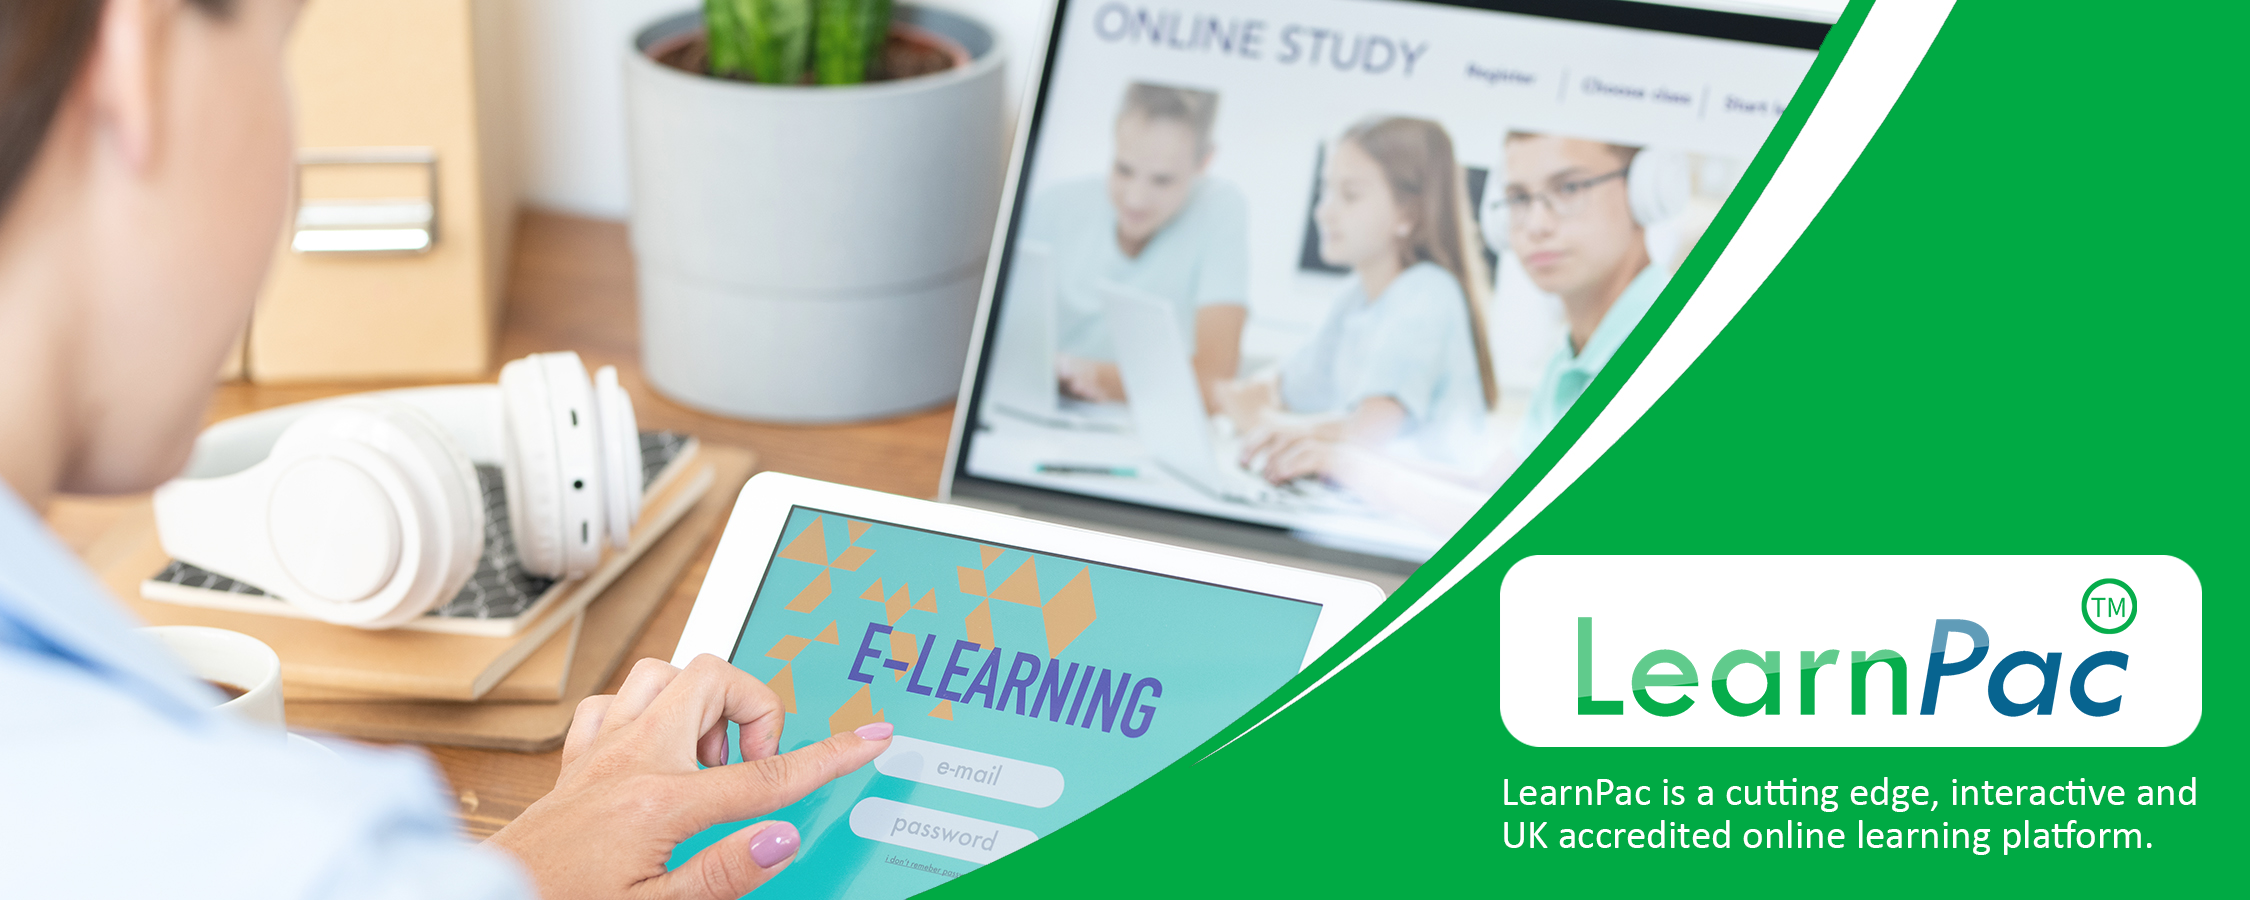 Understanding Your Role - Online Learning Courses - E-Learning Courses - LearnPac Systems UK -